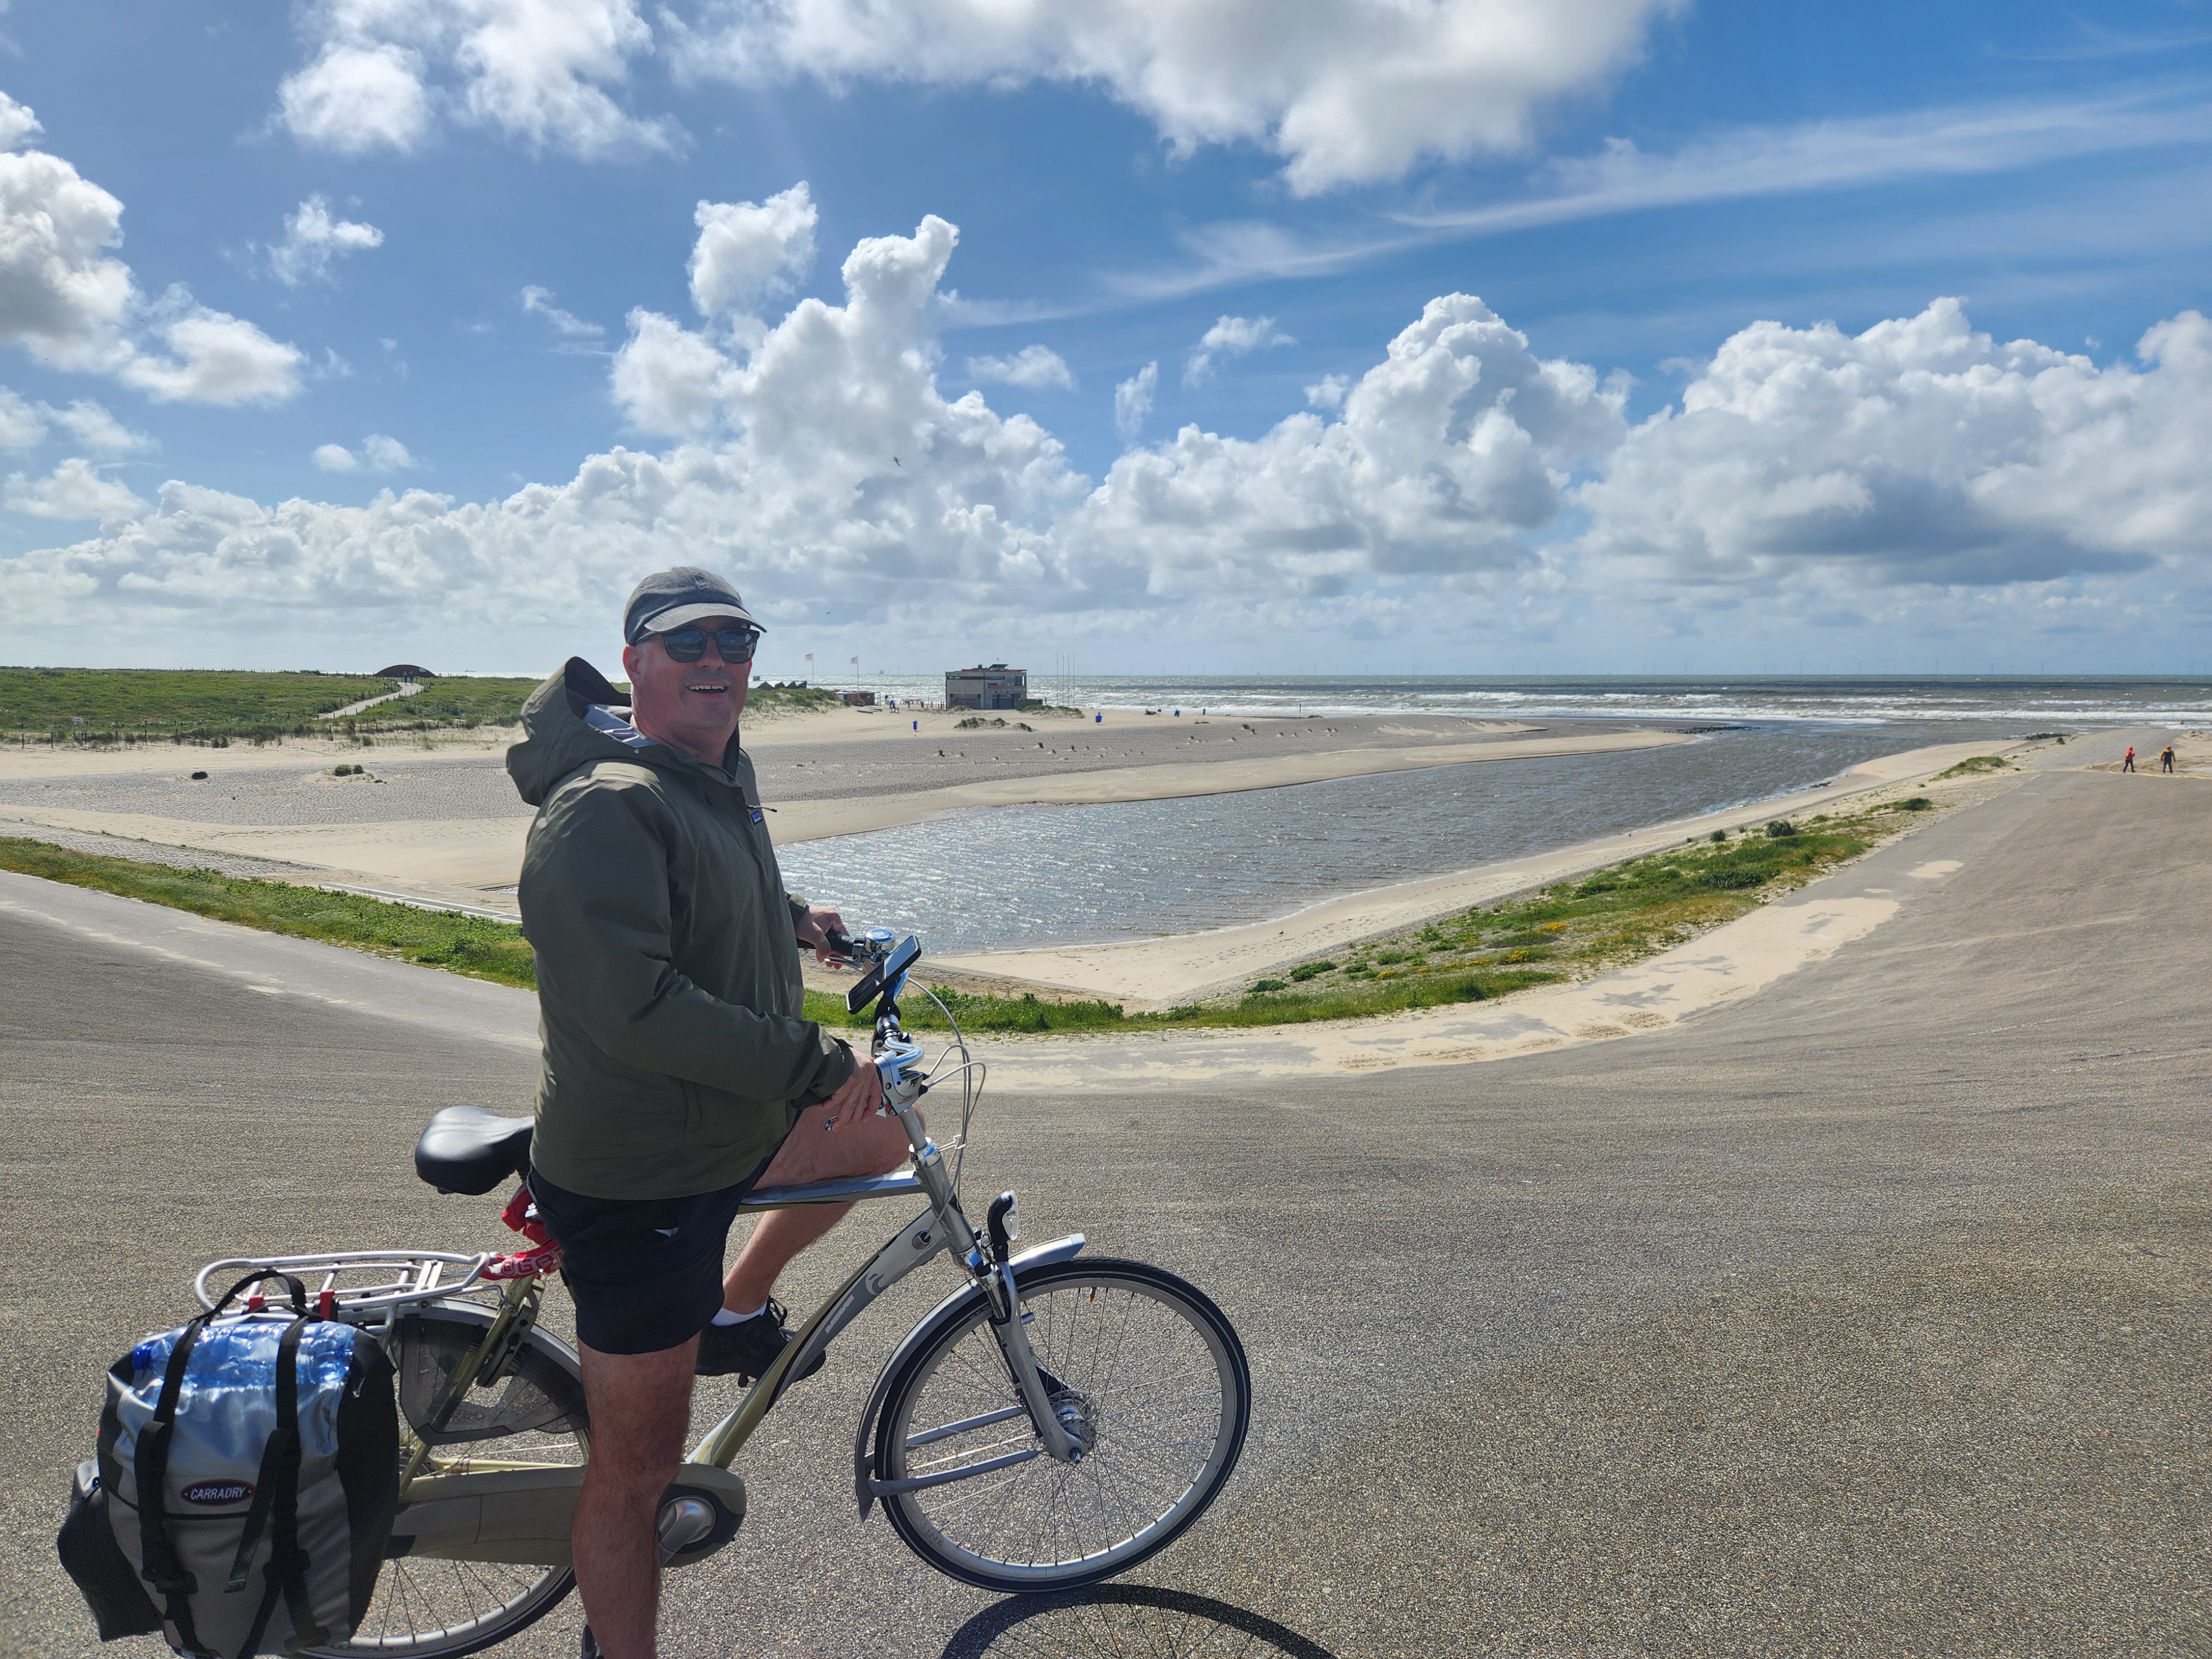 The North sea, there is a river trench heading to the sea, Mark is in the foreground on his bike